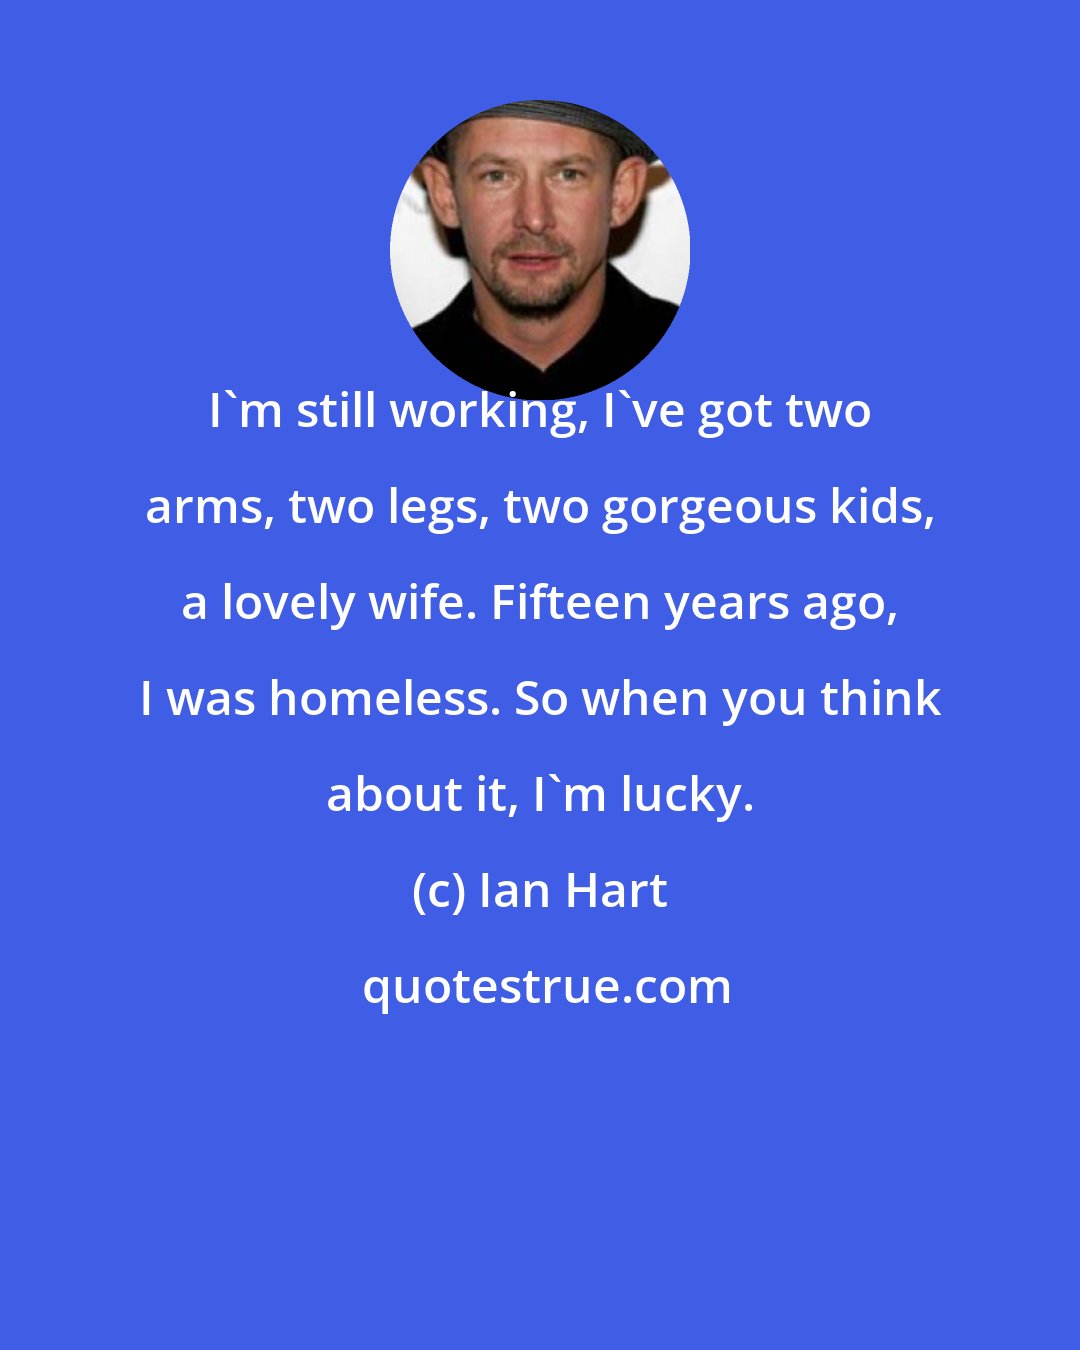 Ian Hart: I'm still working, I've got two arms, two legs, two gorgeous kids, a lovely wife. Fifteen years ago, I was homeless. So when you think about it, I'm lucky.